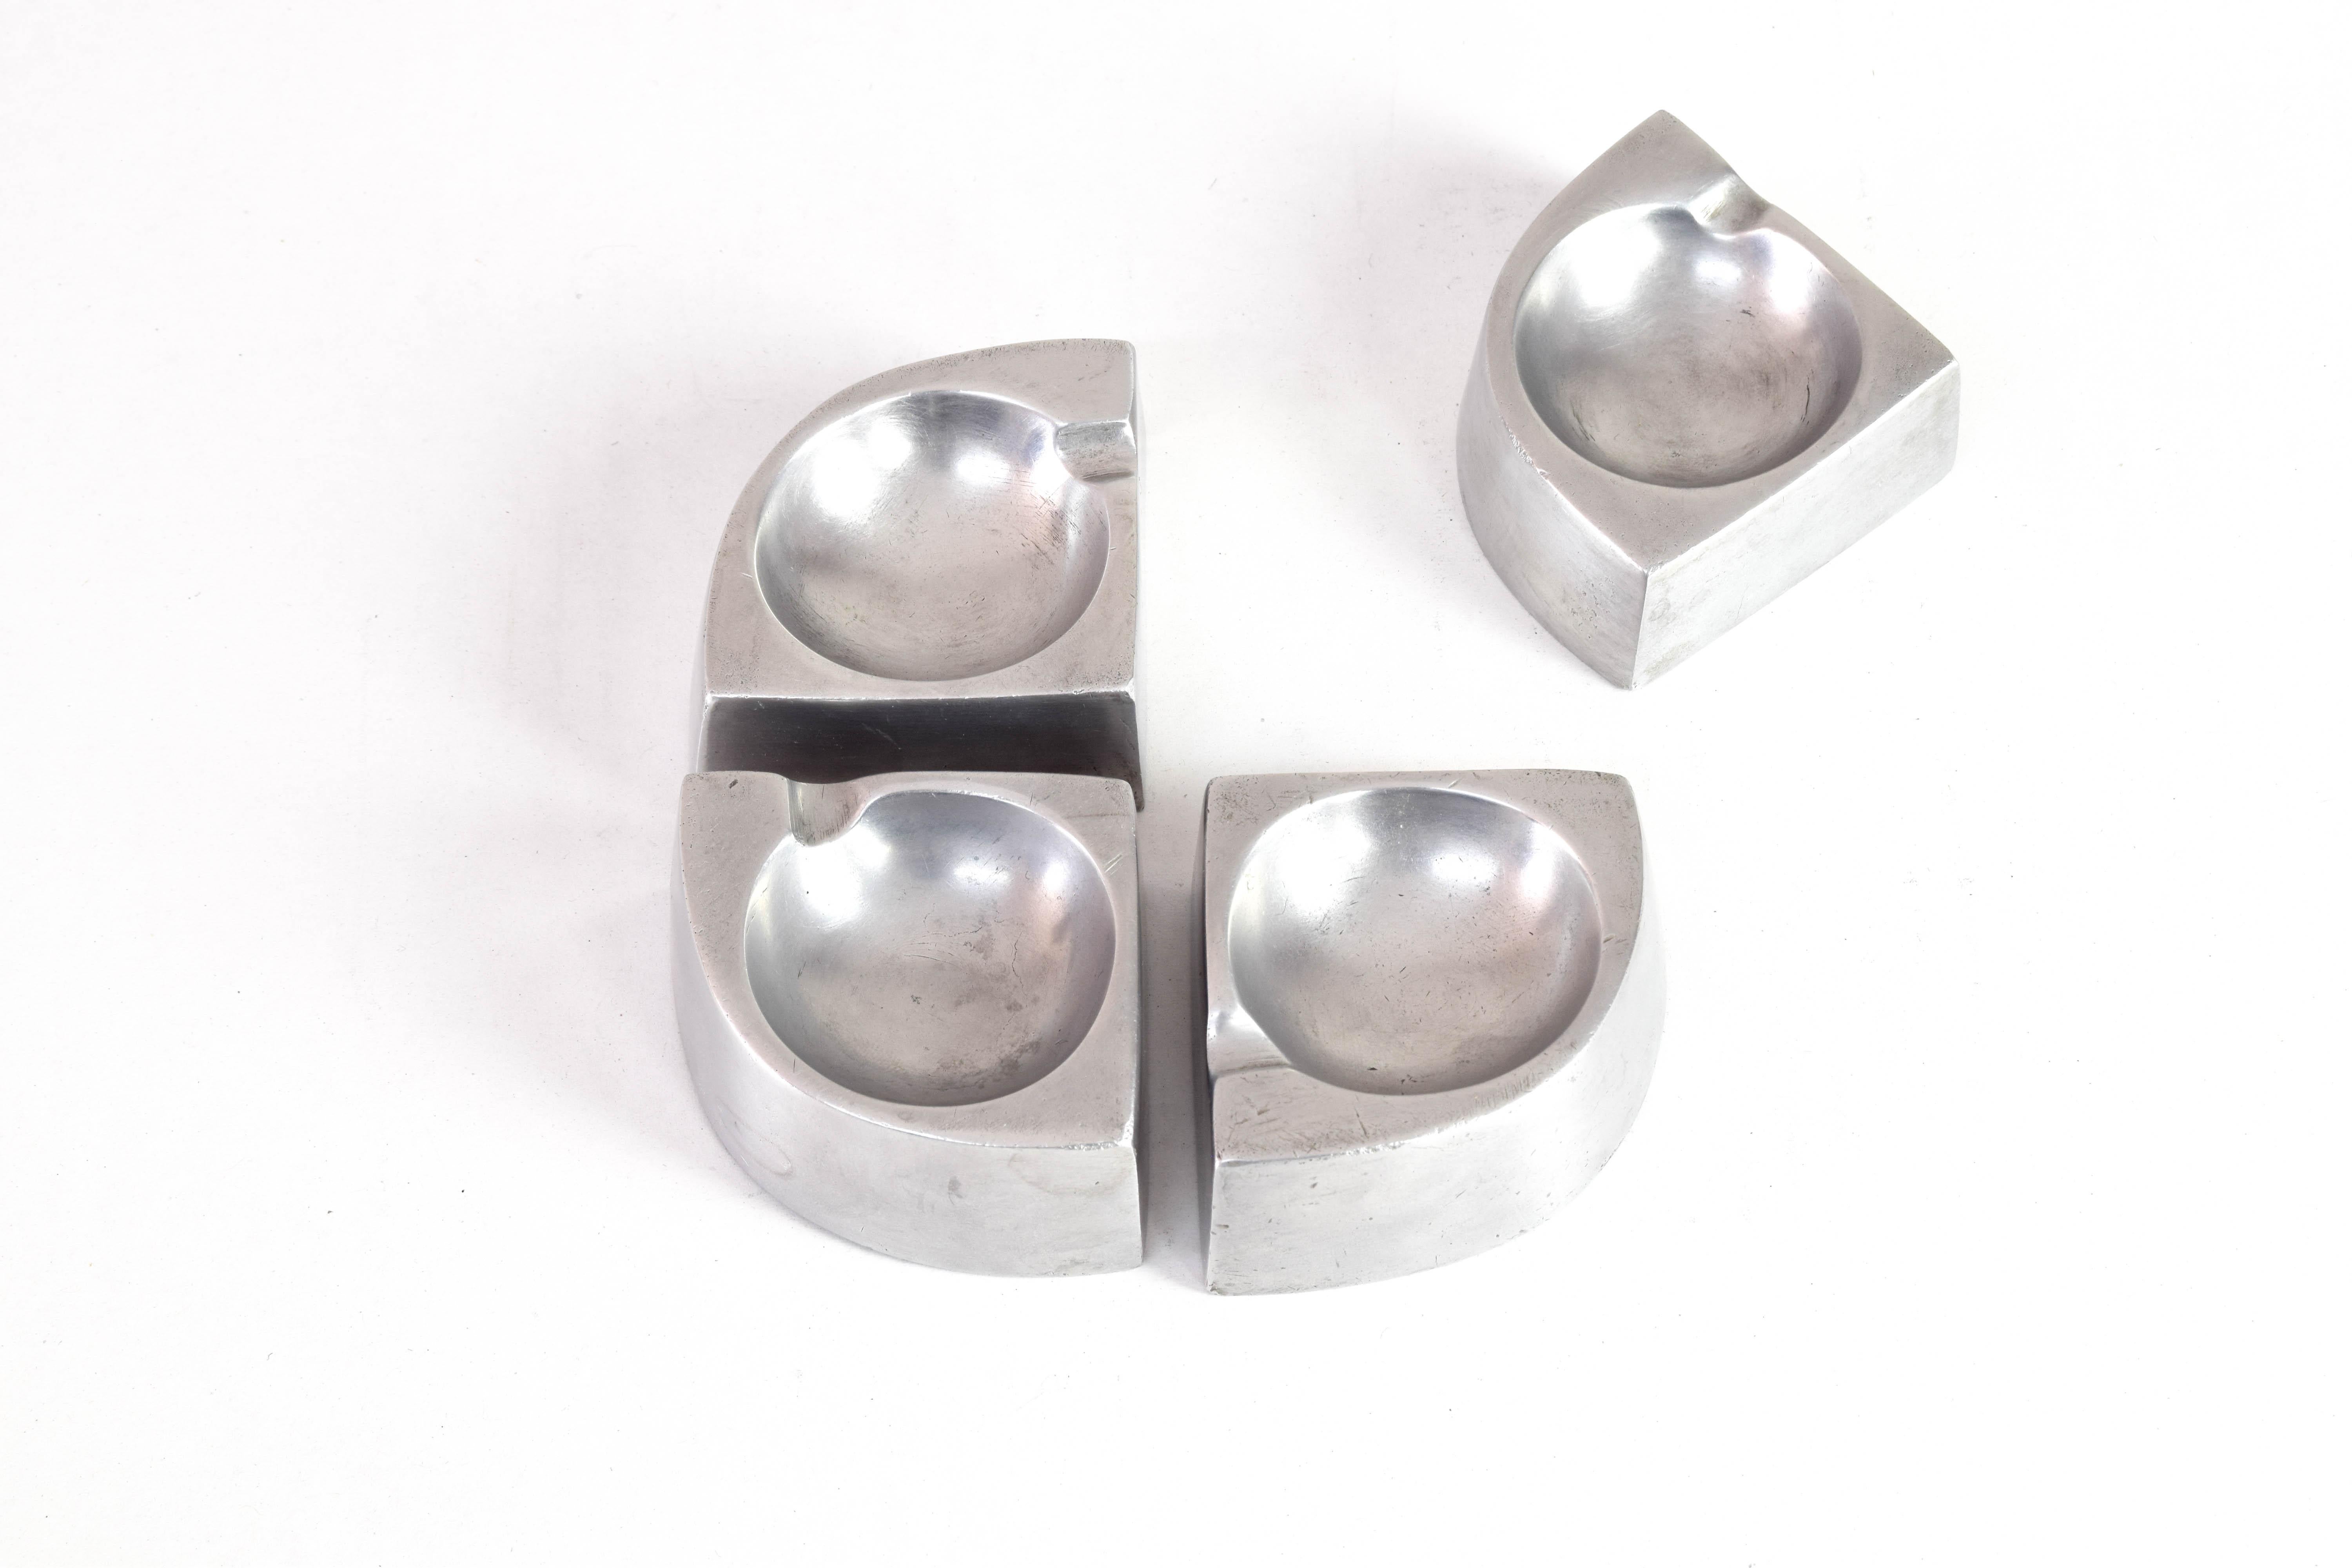 Mid Century Scandinavian Modern Handcrafted Aluminum Four Piece Ashtray, 1960 For Sale 5